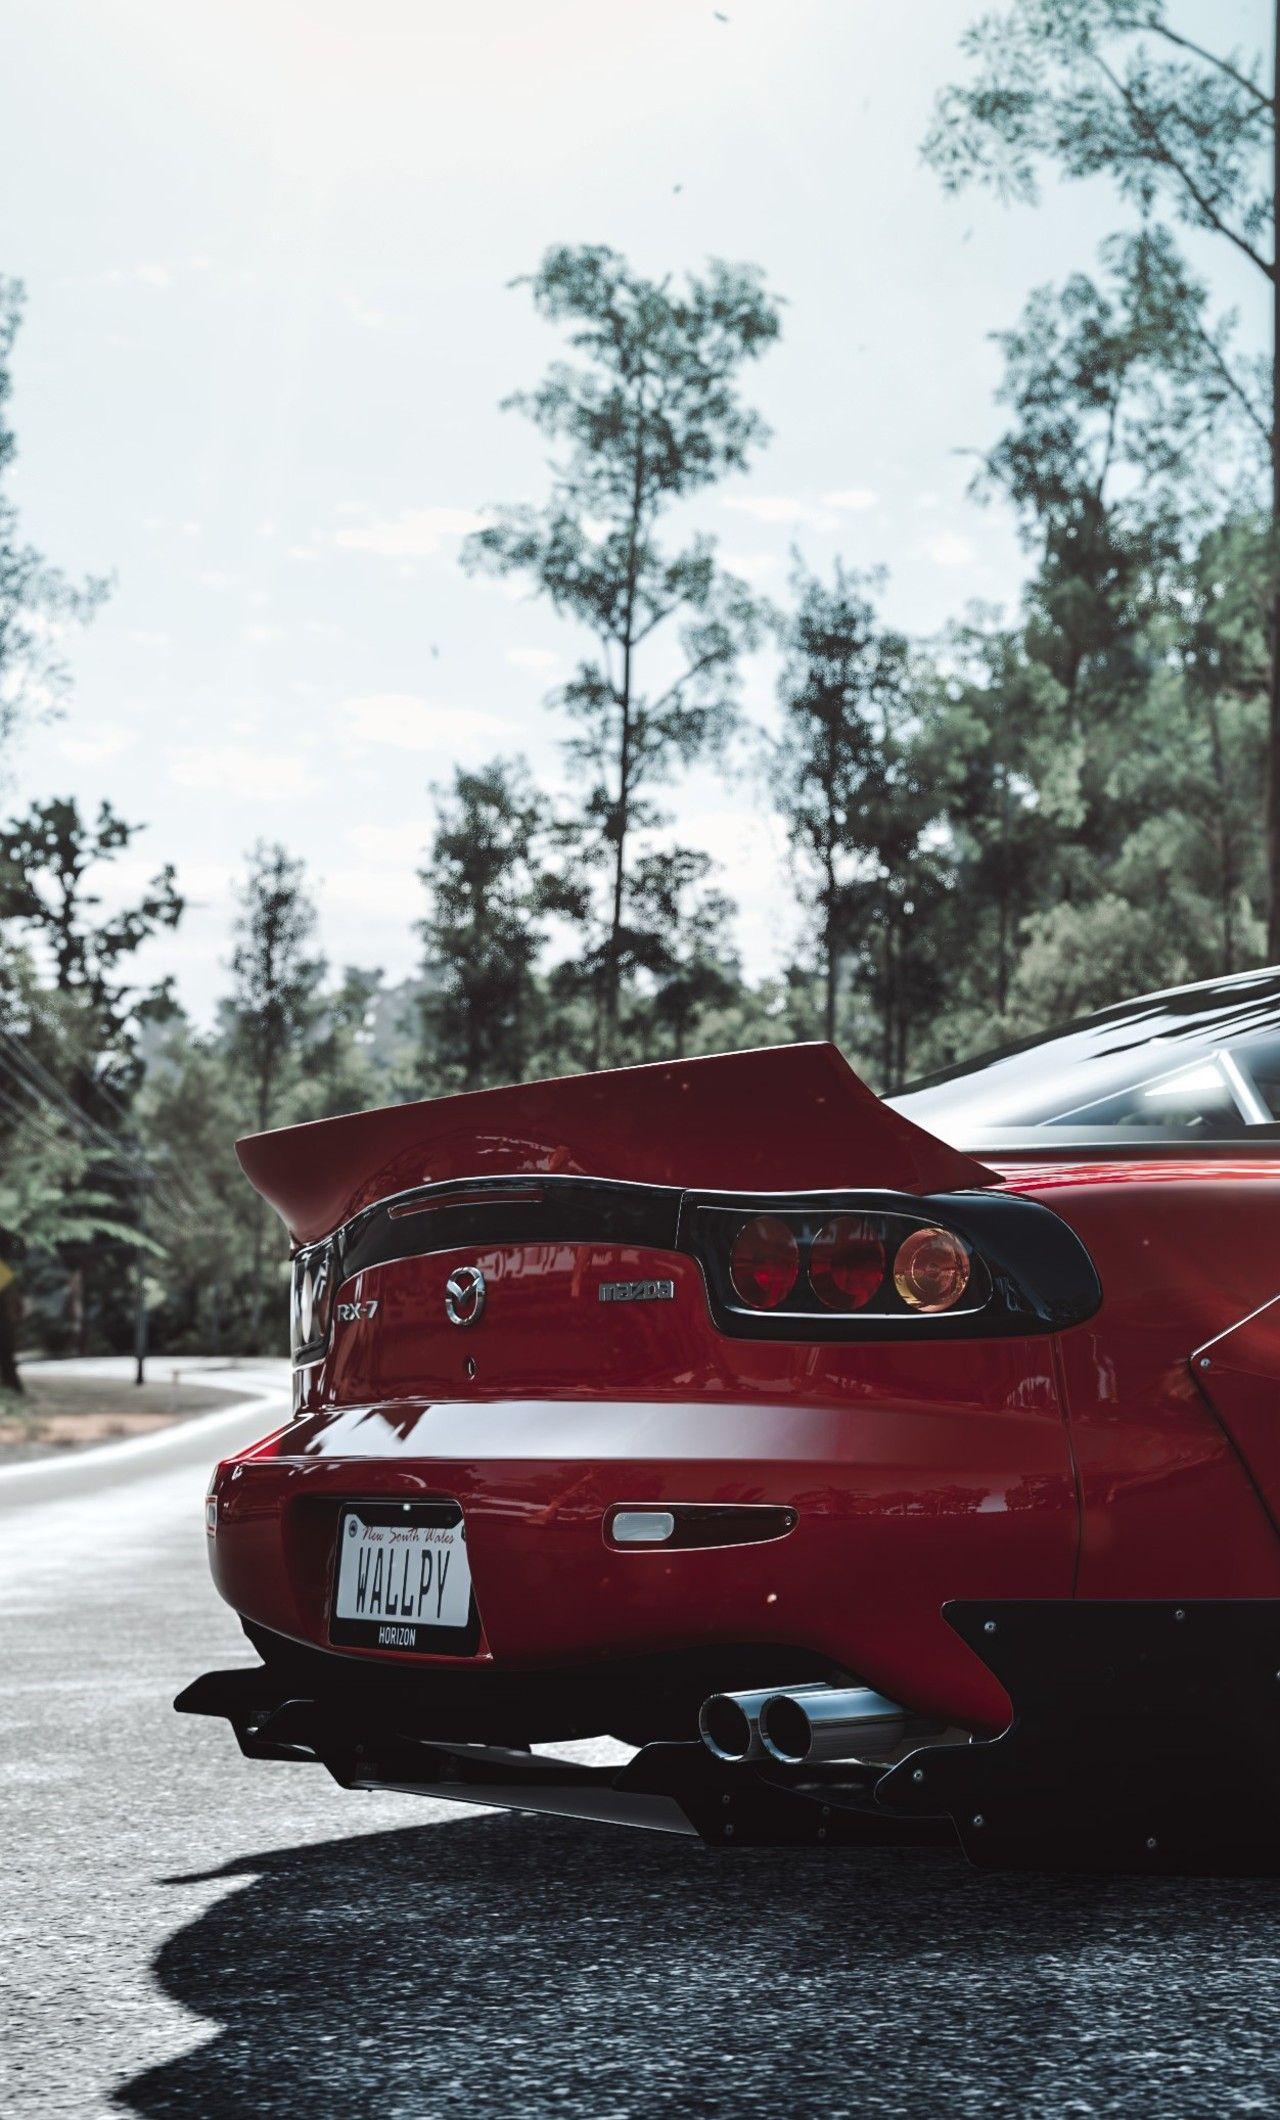 Rx7 Iphone Wallpapers Top Free Rx7 Iphone Backgrounds Wallpaperaccess